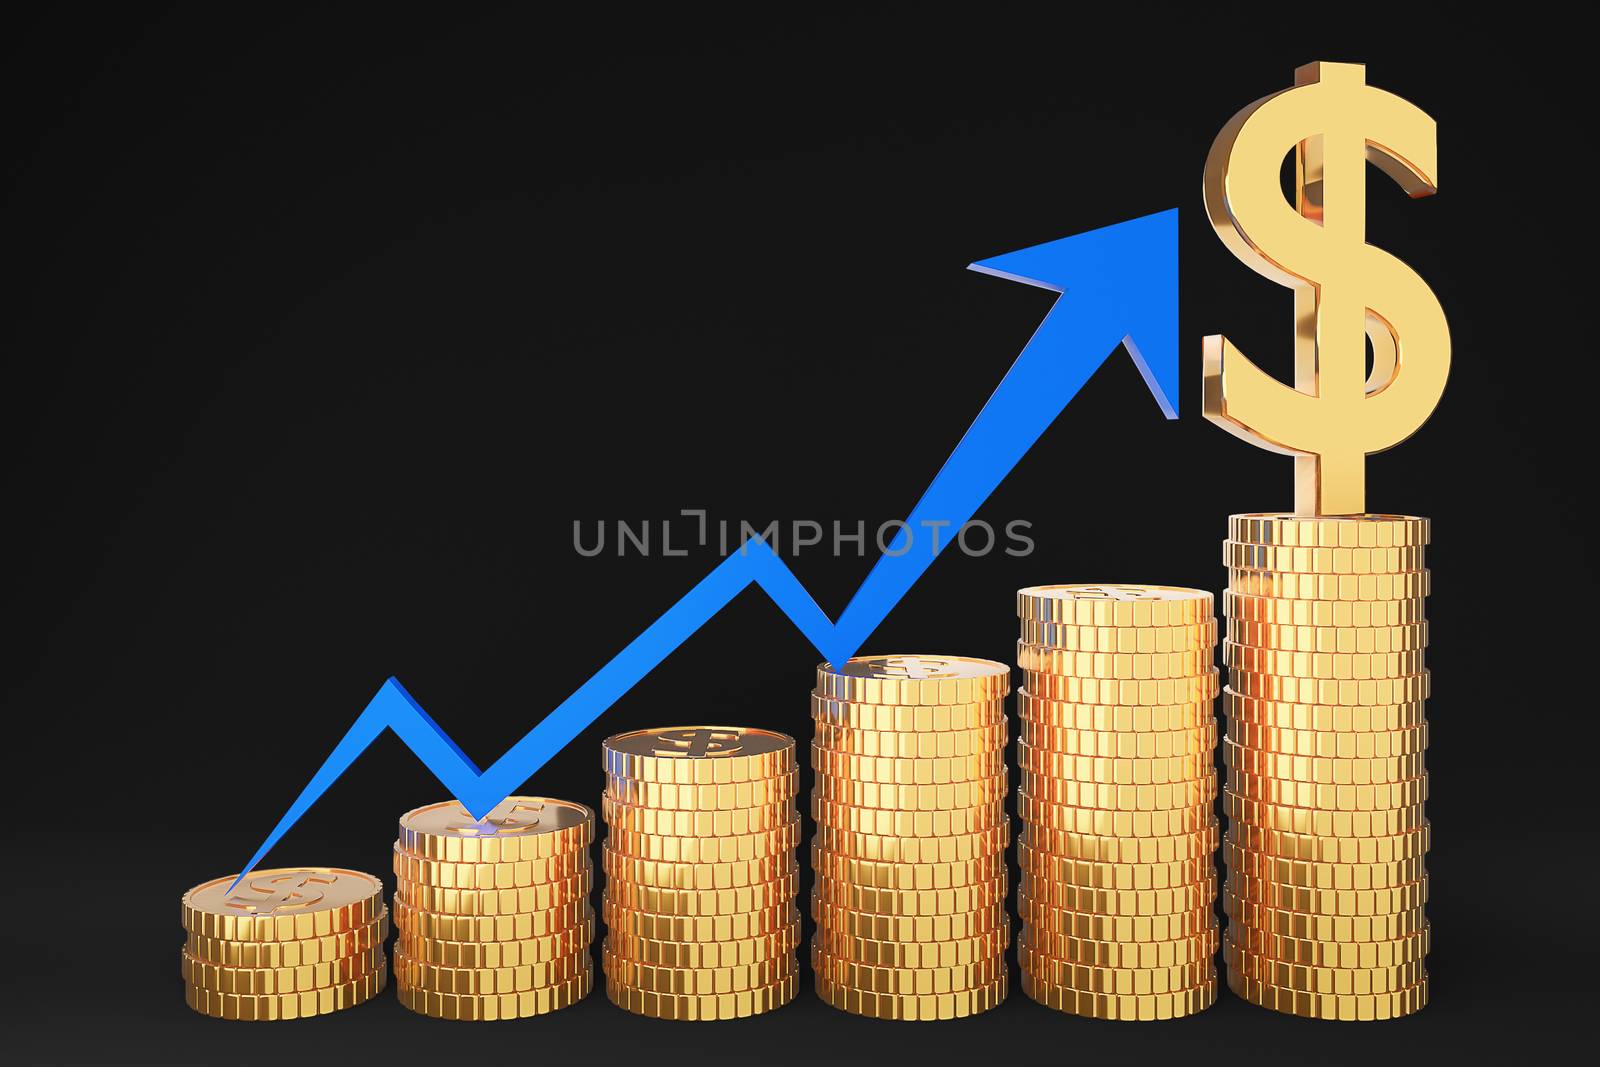 Golden coin stack and finance graph chart on black background., Money saving and investment concept and saving ideas and financial growth.3d model and illustration.